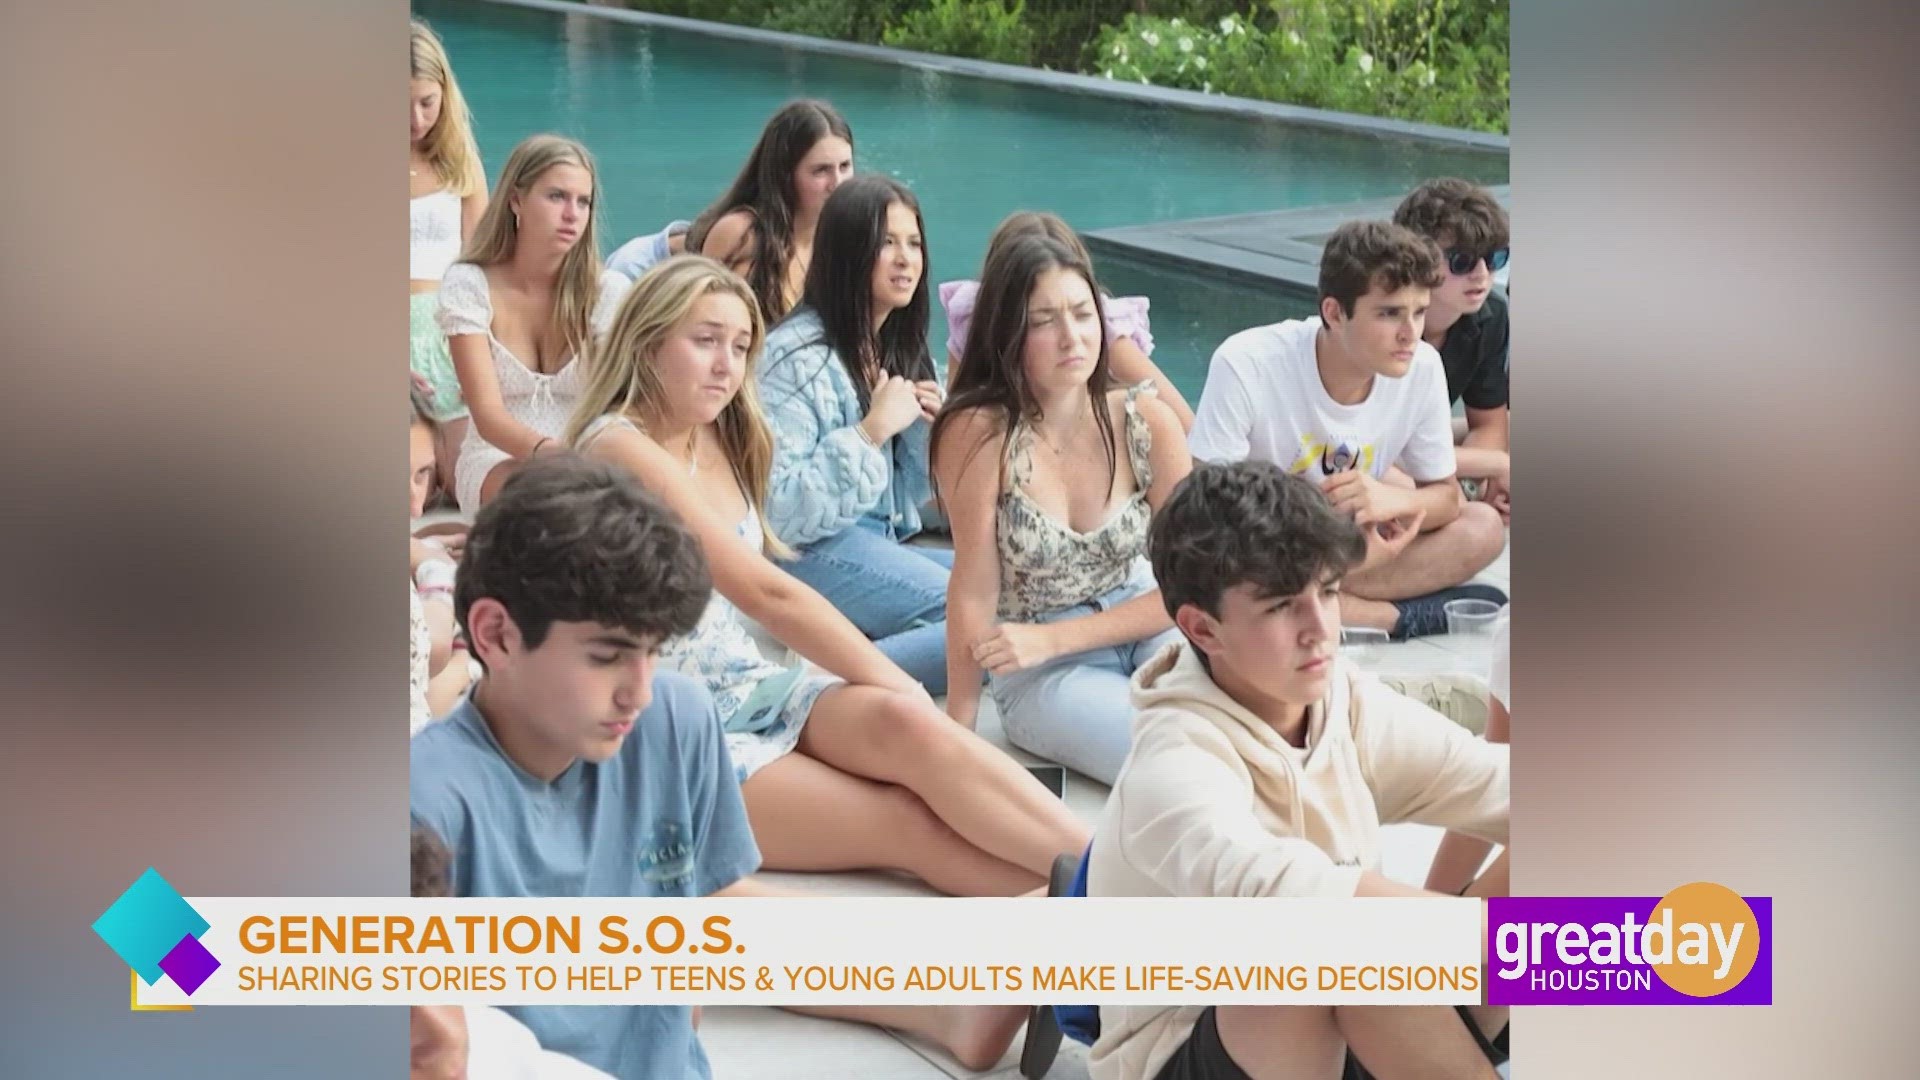 The mission of Generation S.O.S. is to help teens & young adults make life-saving decisions about substance misuse & other mental health challenges.